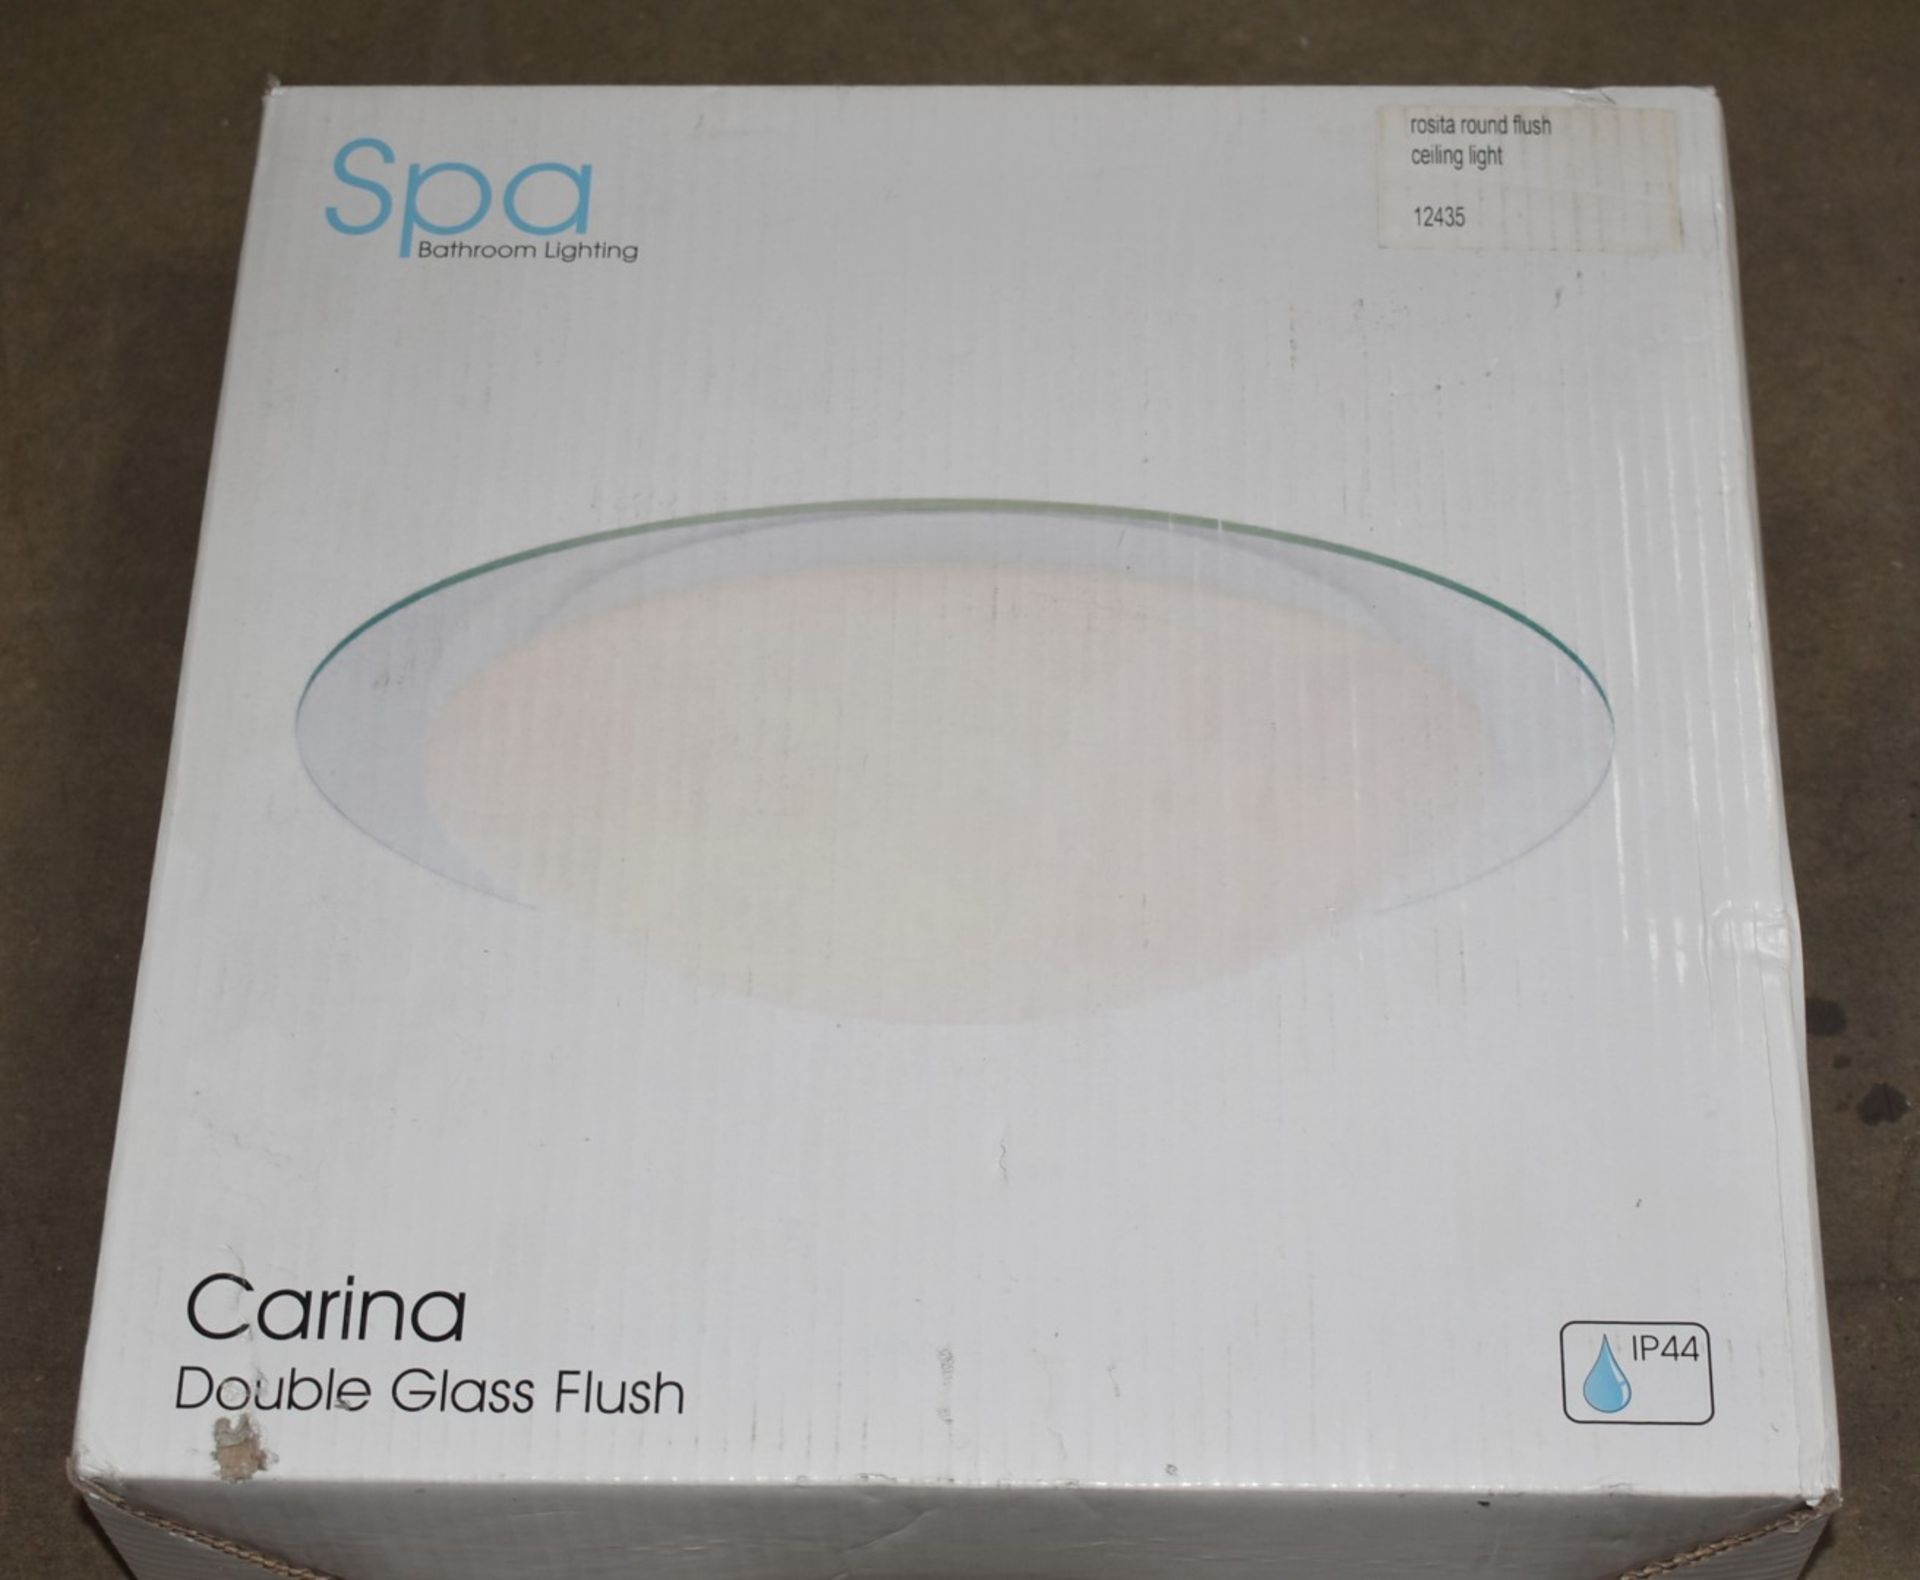 1 x Spa Bathroom Lighting - Carina Glass and Opal Round Ceiling Light - Unused Boxed Stock - CL011 - - Image 3 of 3